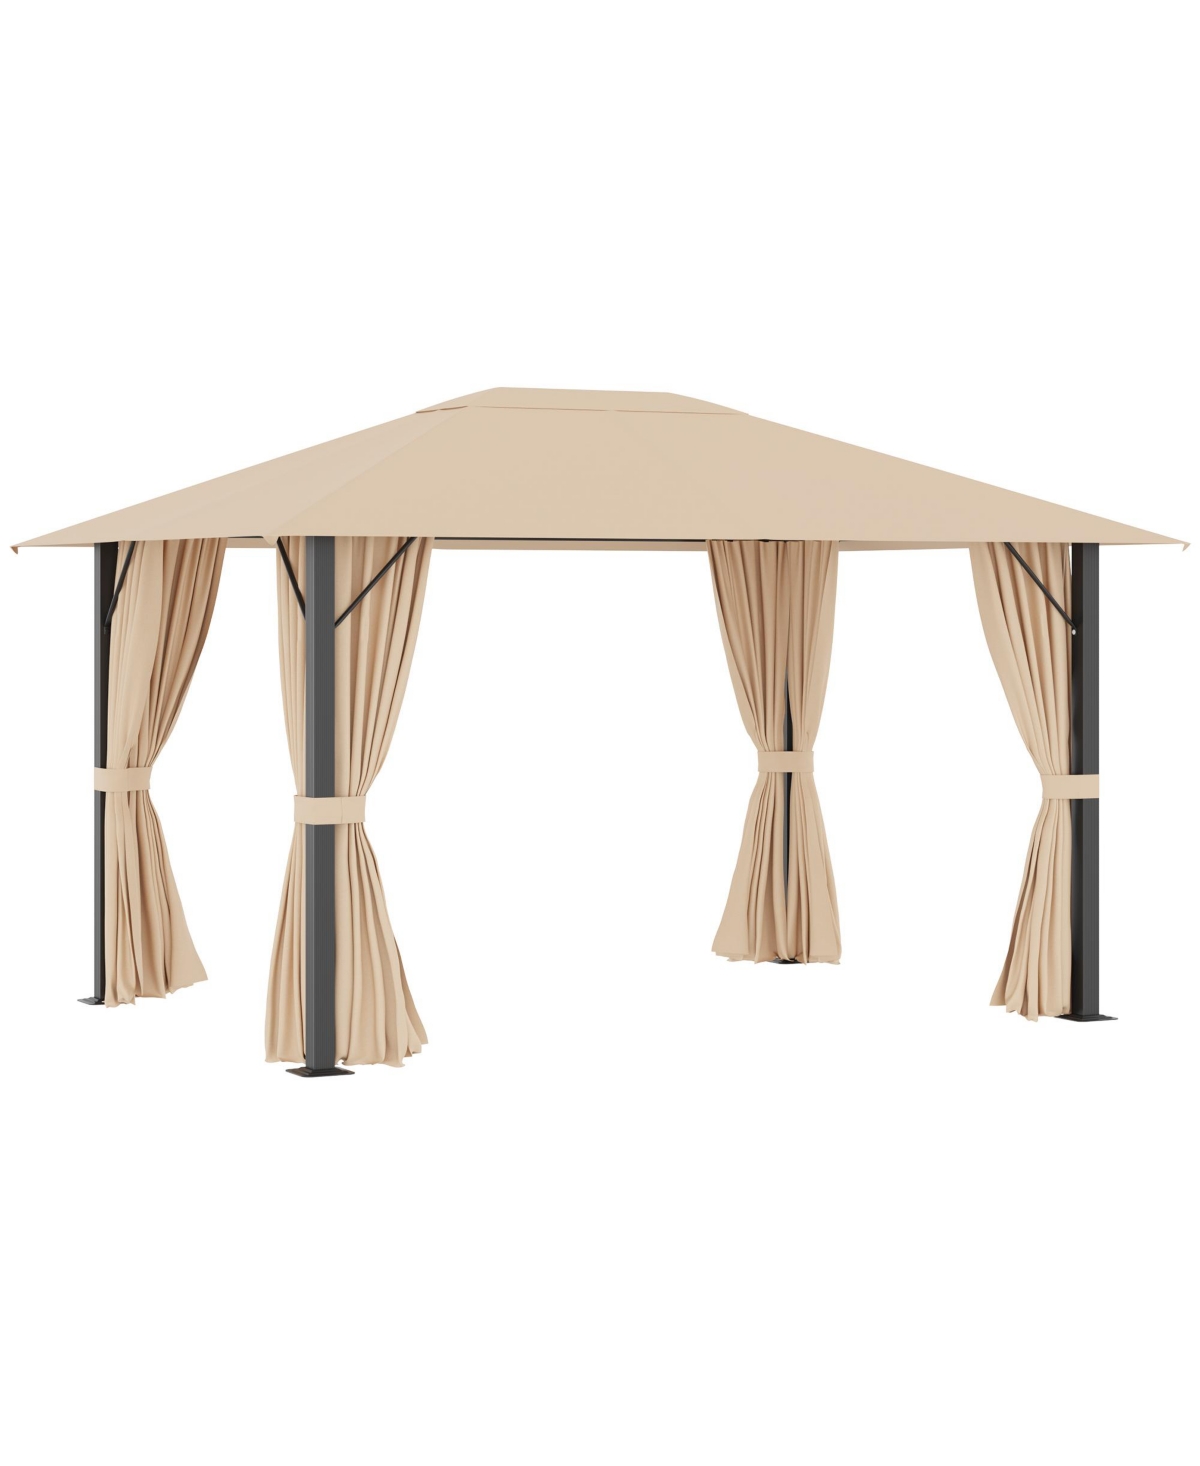 10' x 13' Patio Gazebo Aluminum Frame Outdoor Canopy Shelter with Sidewalls, Vented Roof for Garden, Lawn, Backyard and Deck, Brown - Brown